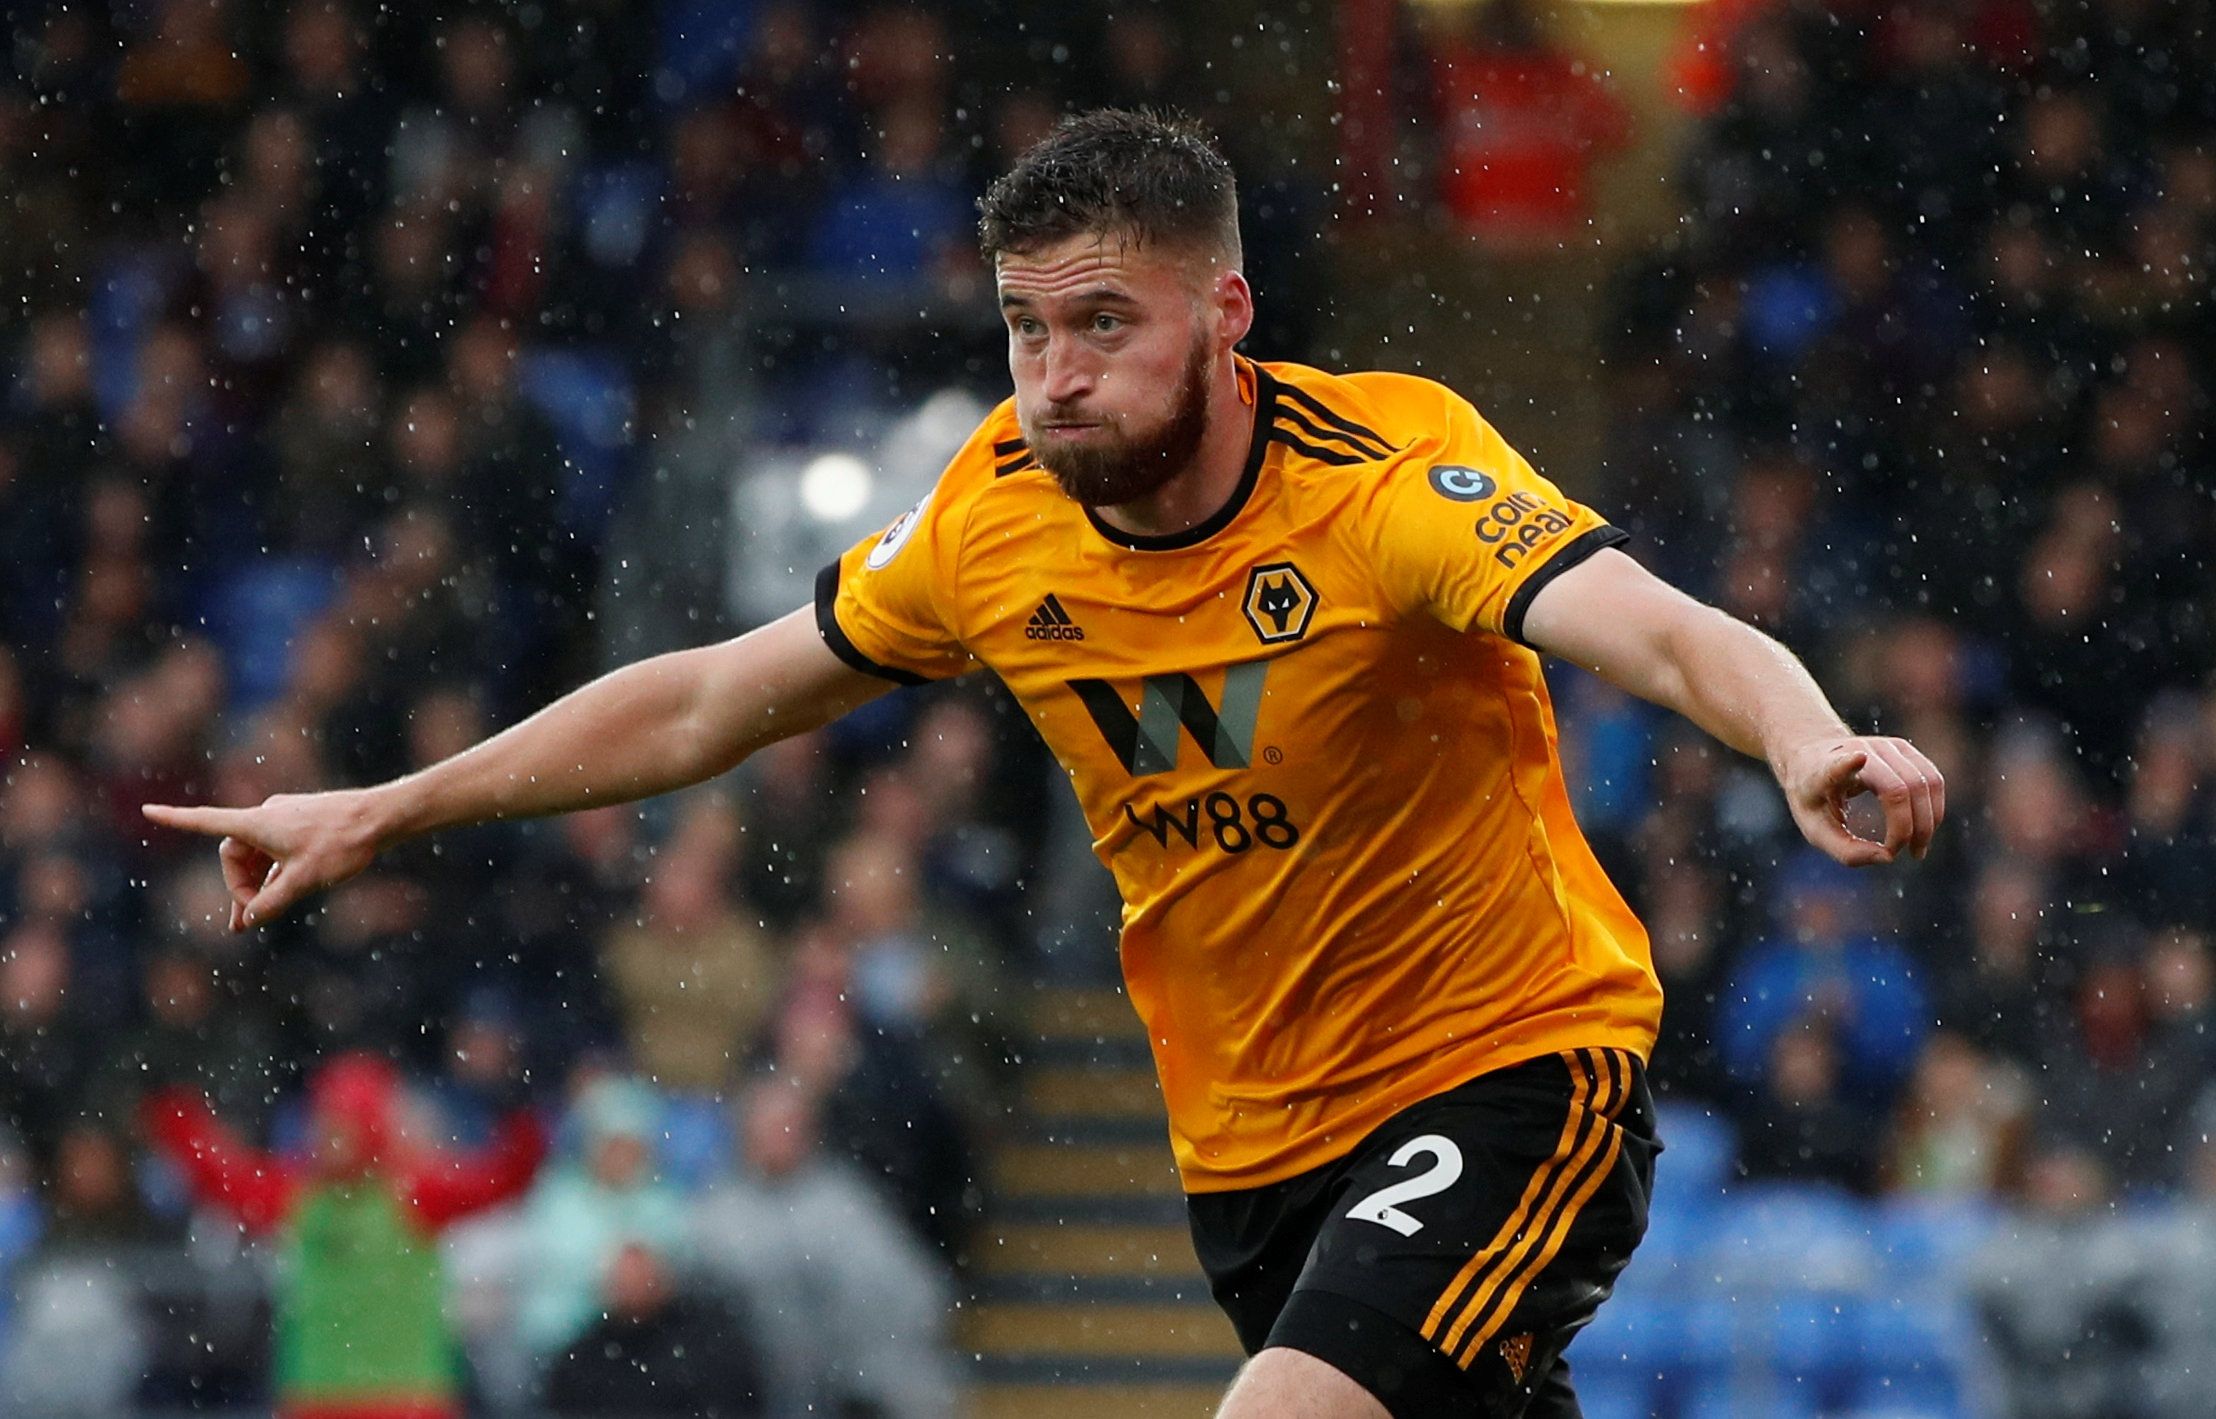 Soccer Football - Premier League - Crystal Palace v Wolverhampton Wanderers - Selhurst Park, London, Britain - October 6, 2018  Wolverhampton Wanderers' Matt Doherty celebrates scoring their first goal   Action Images via Reuters/John Sibley  EDITORIAL USE ONLY. No use with unauthorized audio, video, data, fixture lists, club/league logos or "live" services. Online in-match use limited to 75 images, no video emulation. No use in betting, games or single club/league/player publications.  Please c